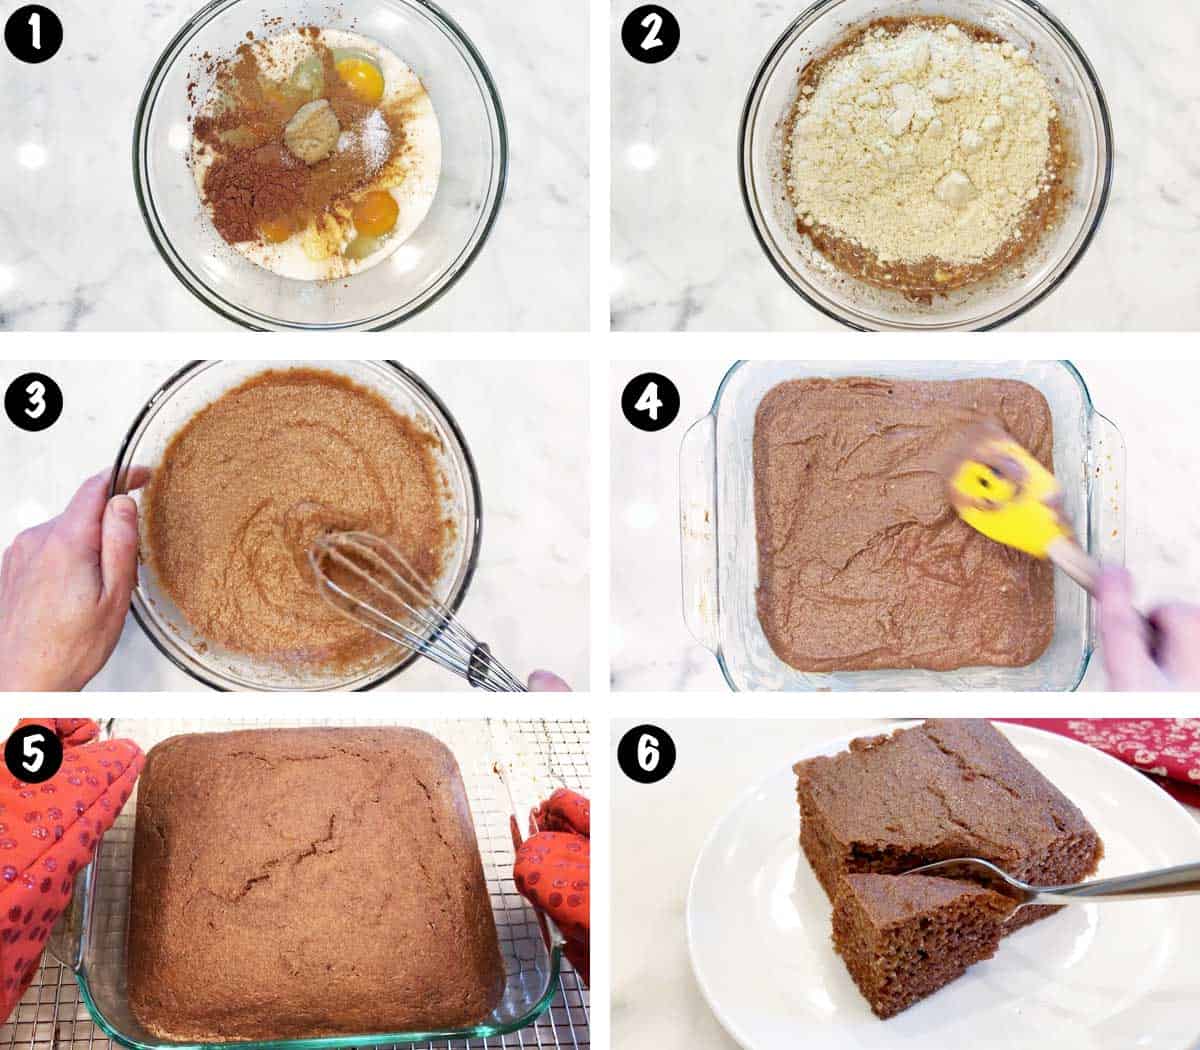 A six-photo collage showing the steps for baking a keto gingerbread.  